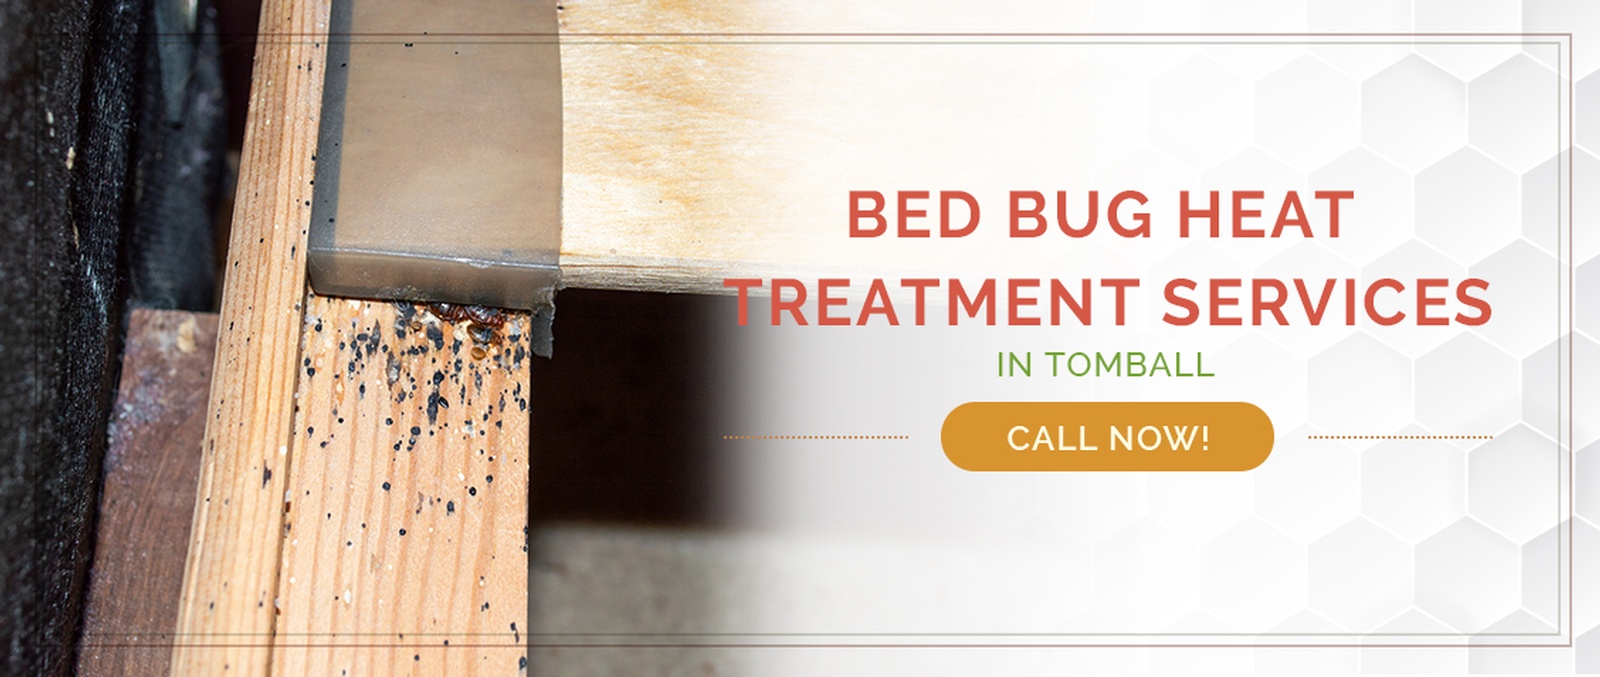 Tomball Bed Bug Treatment / Heater Rental Services by Houston Bed Bug Heaters